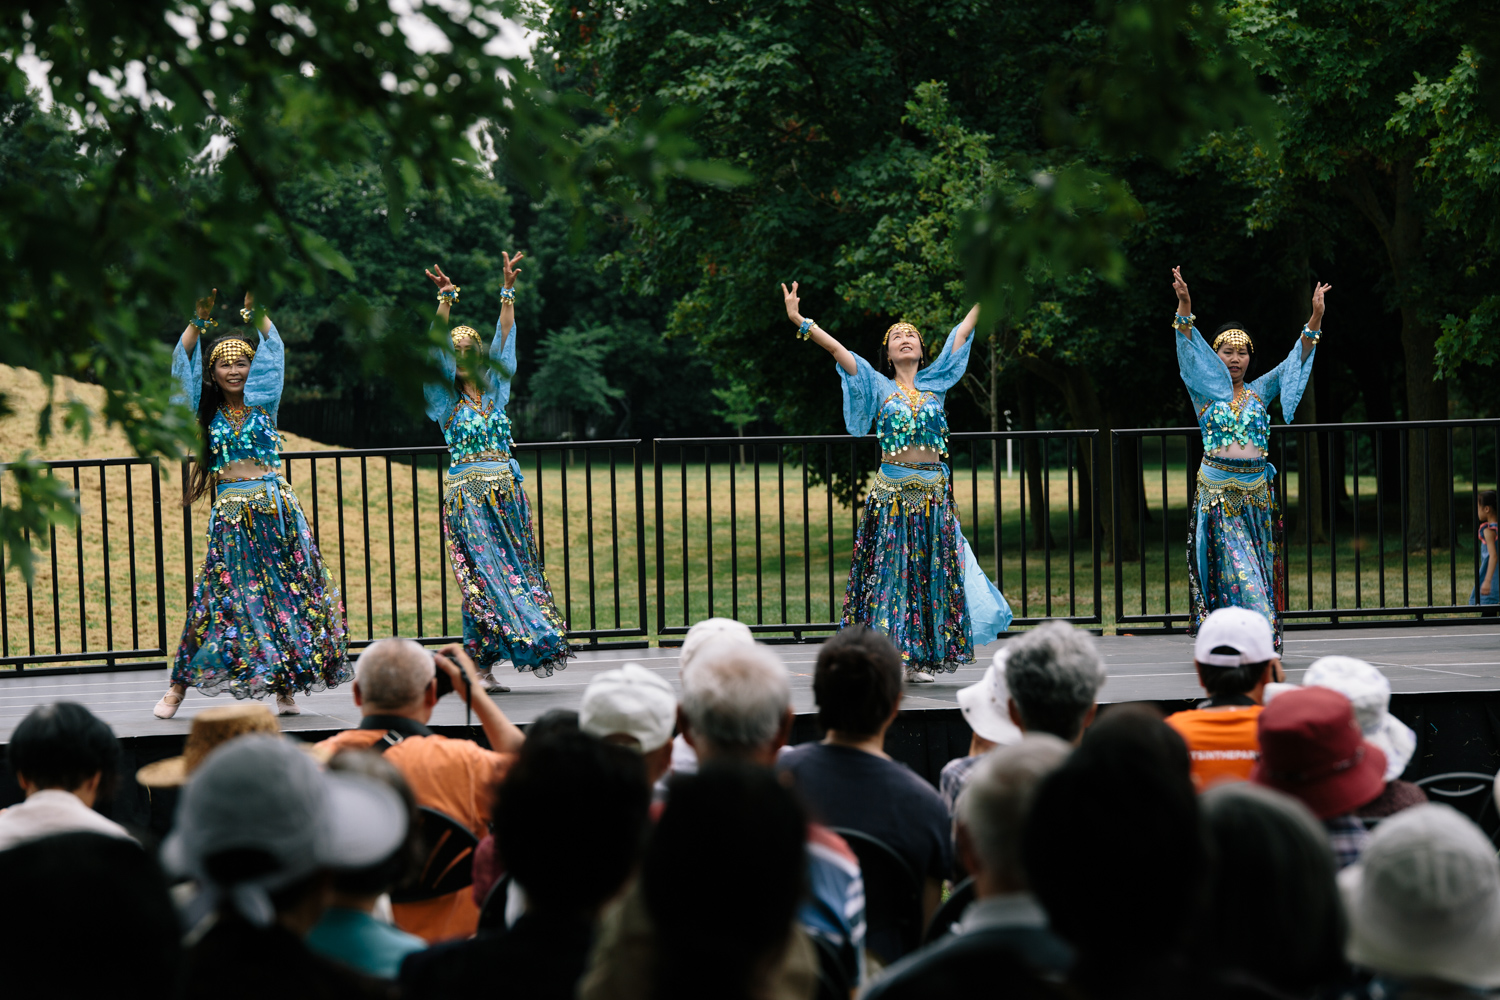 Four women in blue costumes dance on a raised stage while audience members watch.